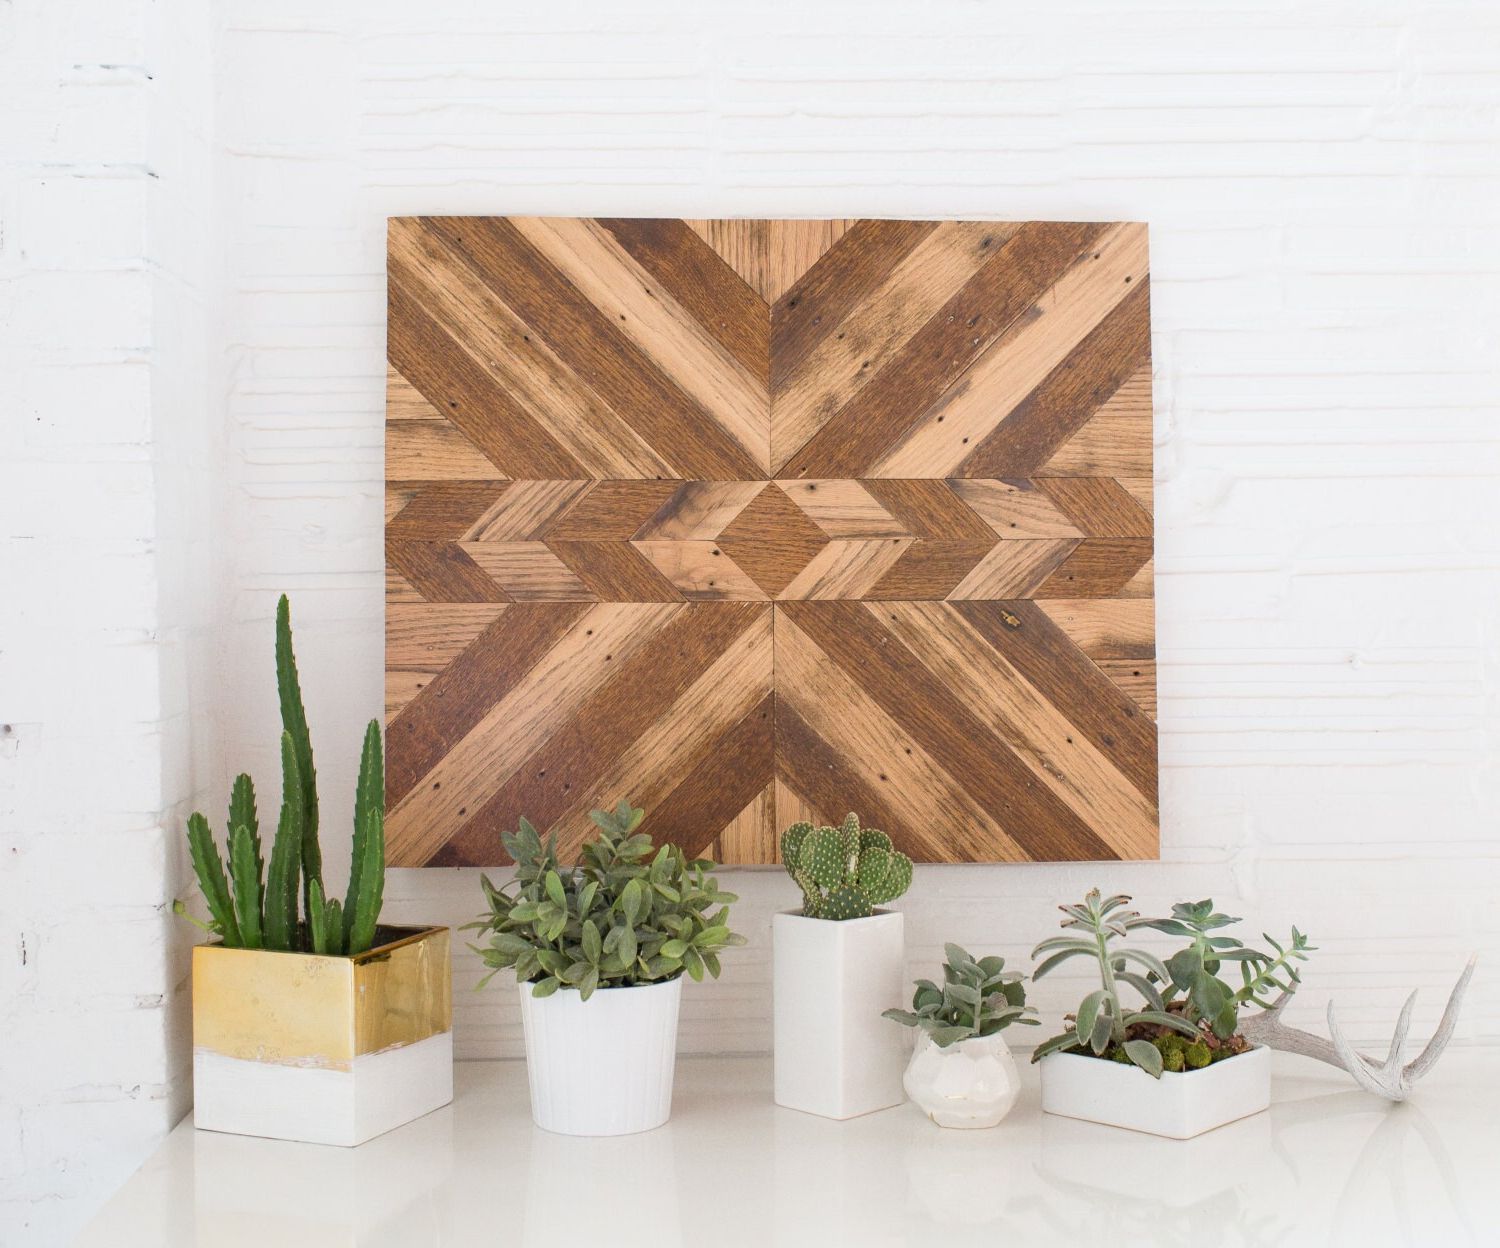 Urban Tribal Wood Wall Art Pertaining To Trendy Tribal Reclaimed Wood Wall Panel Art With Diamond And Chevron (View 13 of 20)